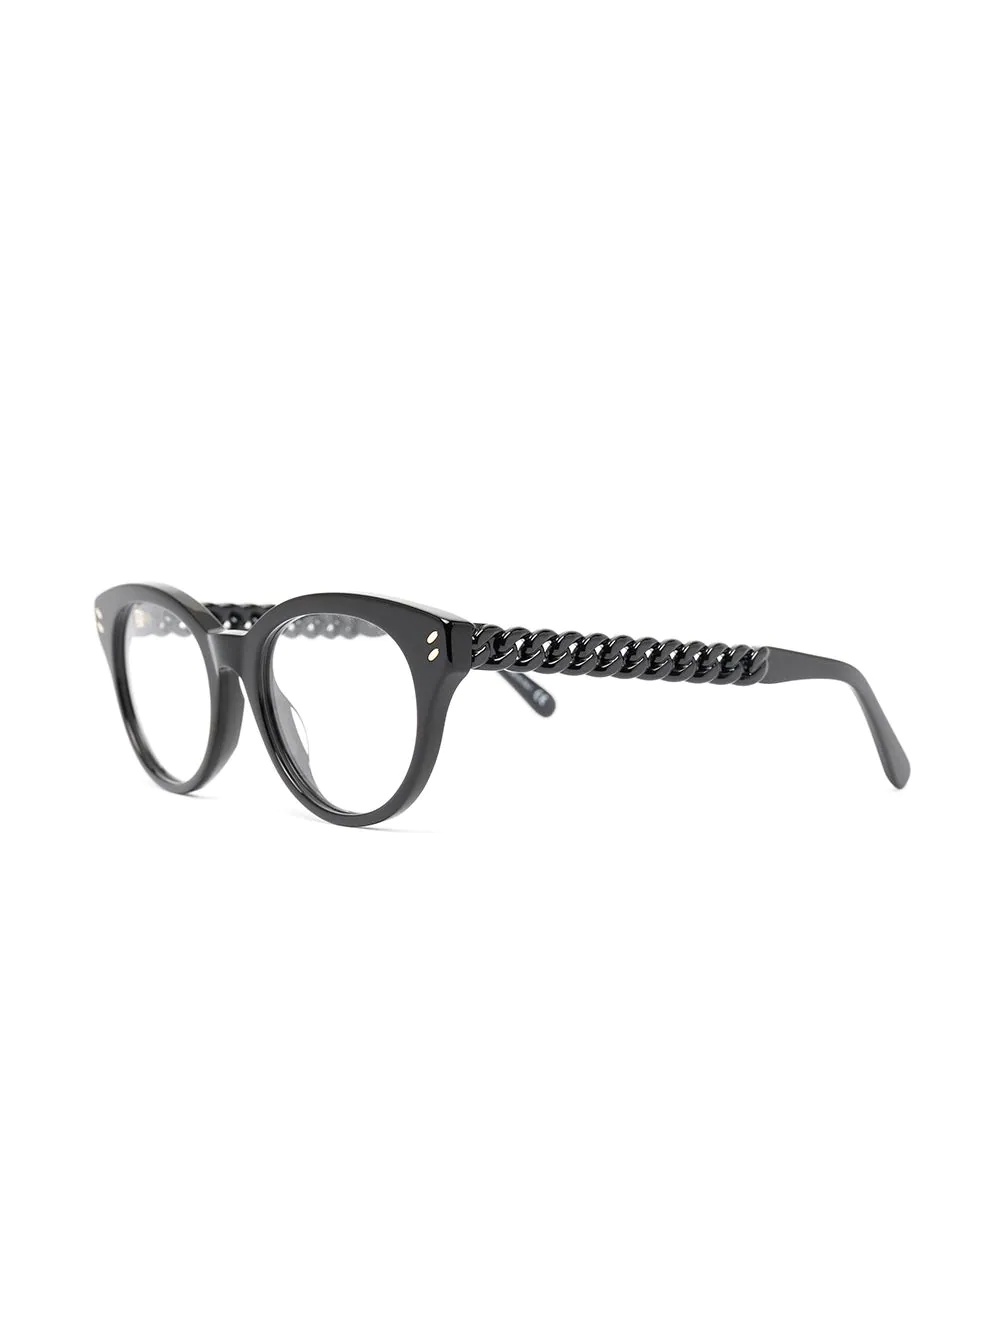 chain-effect round frame glasses - 2